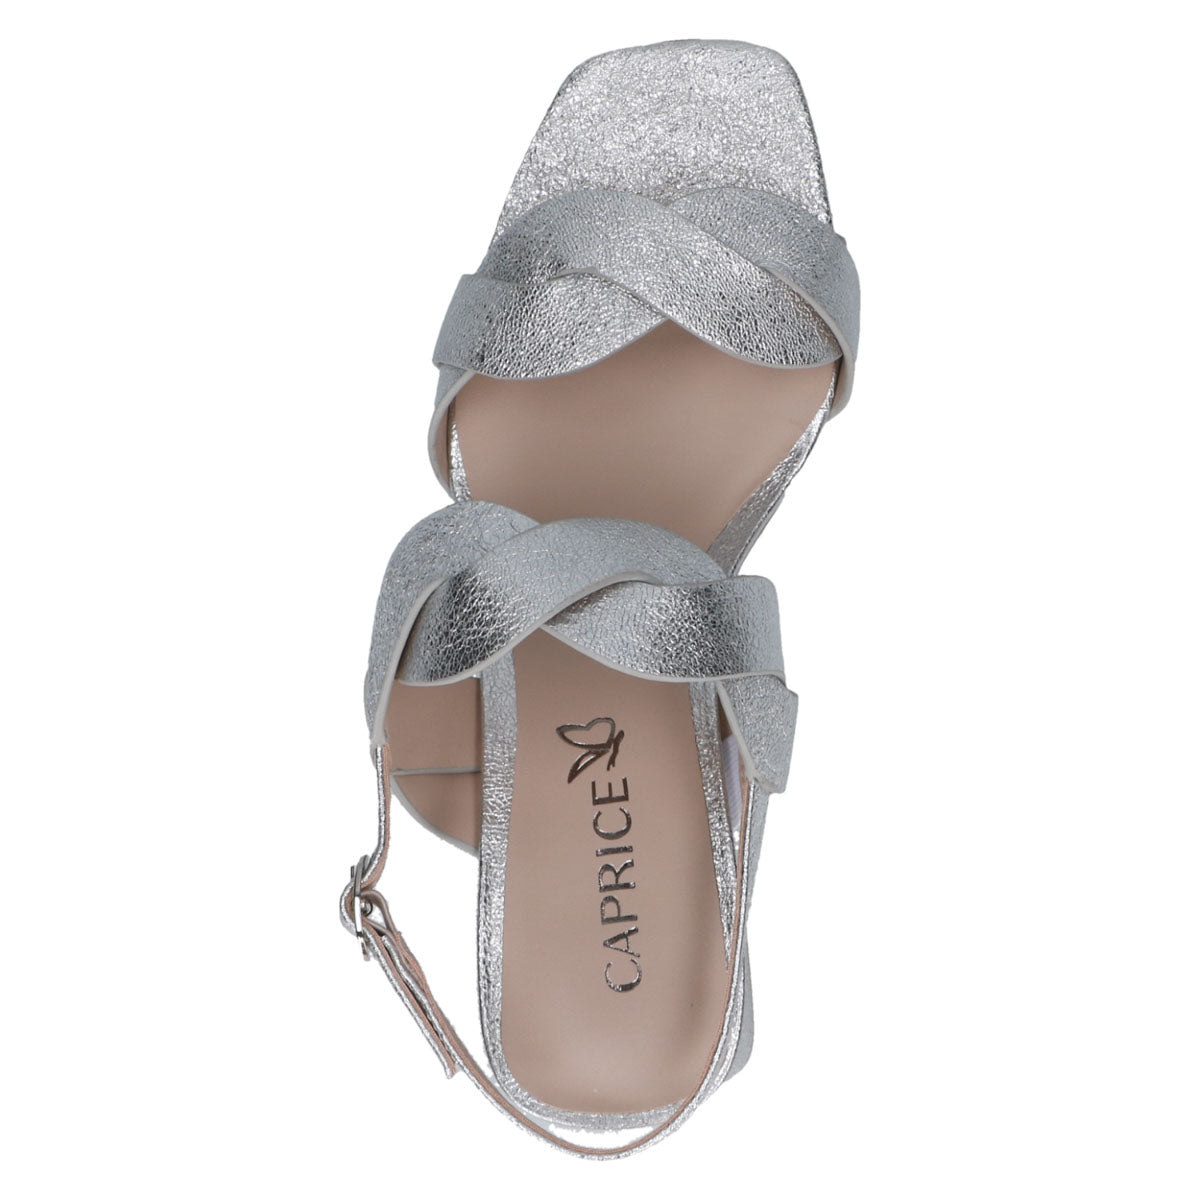 Inside view showing the comfortable synthetic lining of the Silver Block Heel Sandal.